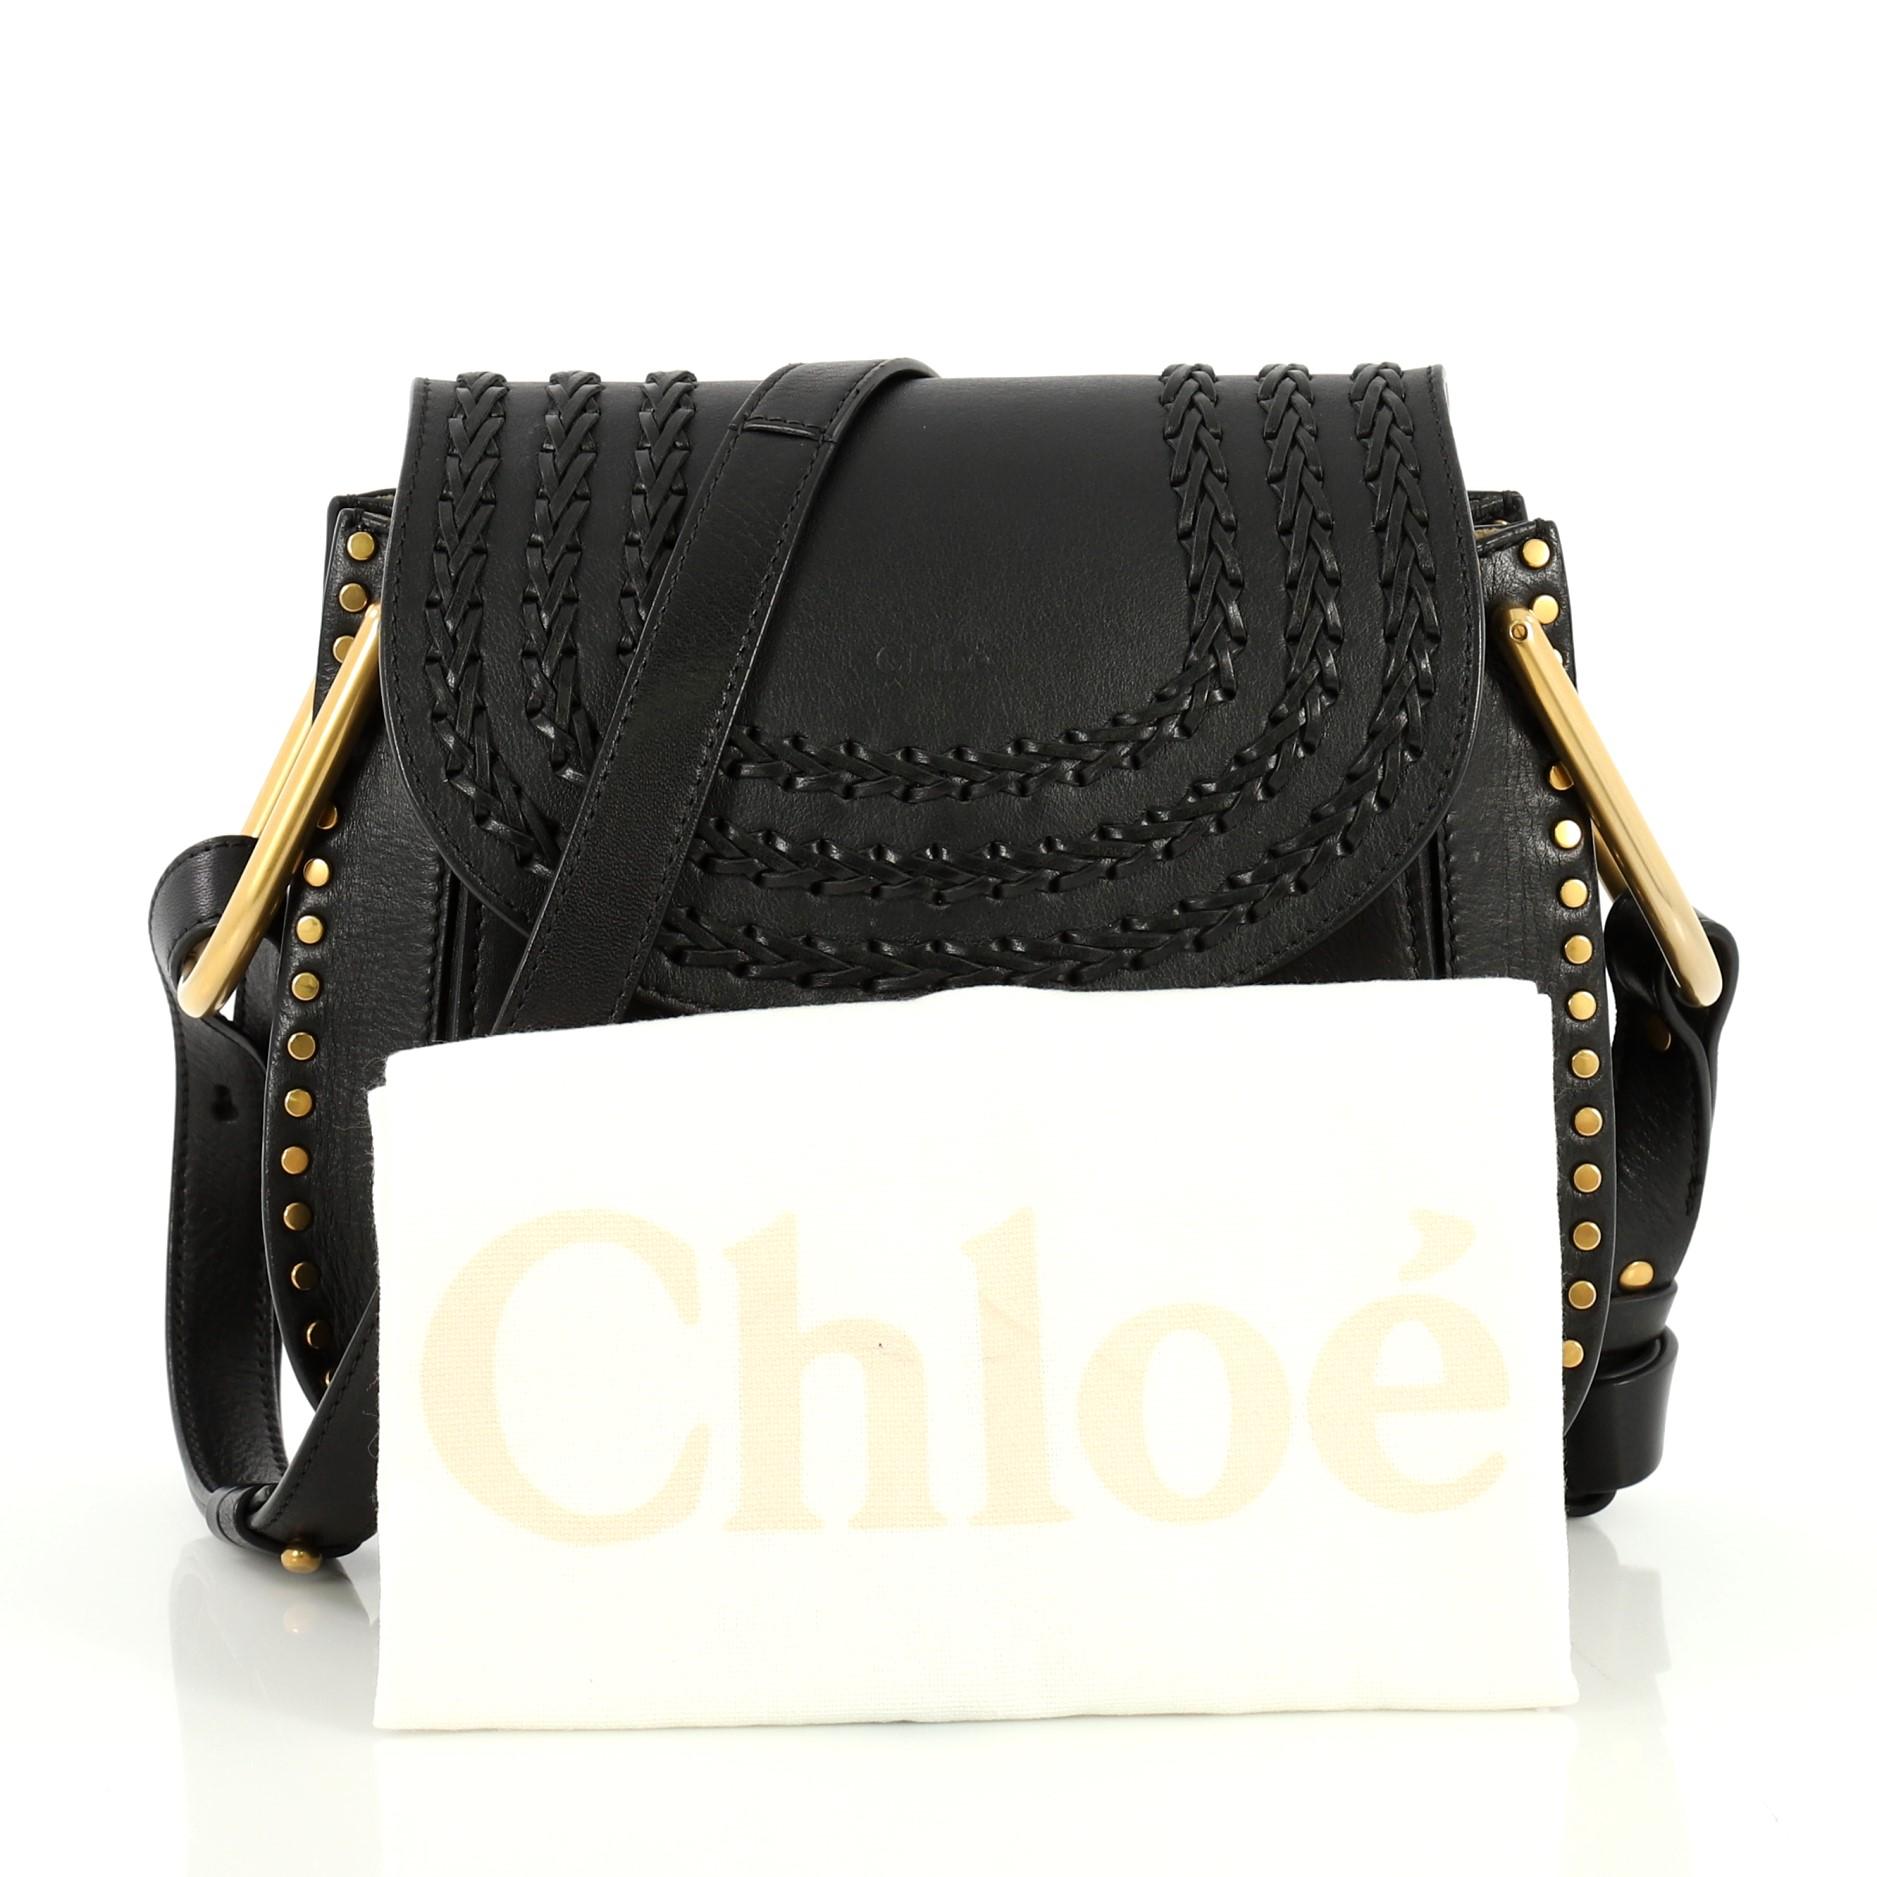 This Chloe Hudson Handbag Whipstitch Leather Medium, crafted from black leather, features an adjustable flat shoulder strap, whipstitched detailing, suede tassel, studded trim, slip pocket under flap and gold-tone hardware. Its flap opens to a